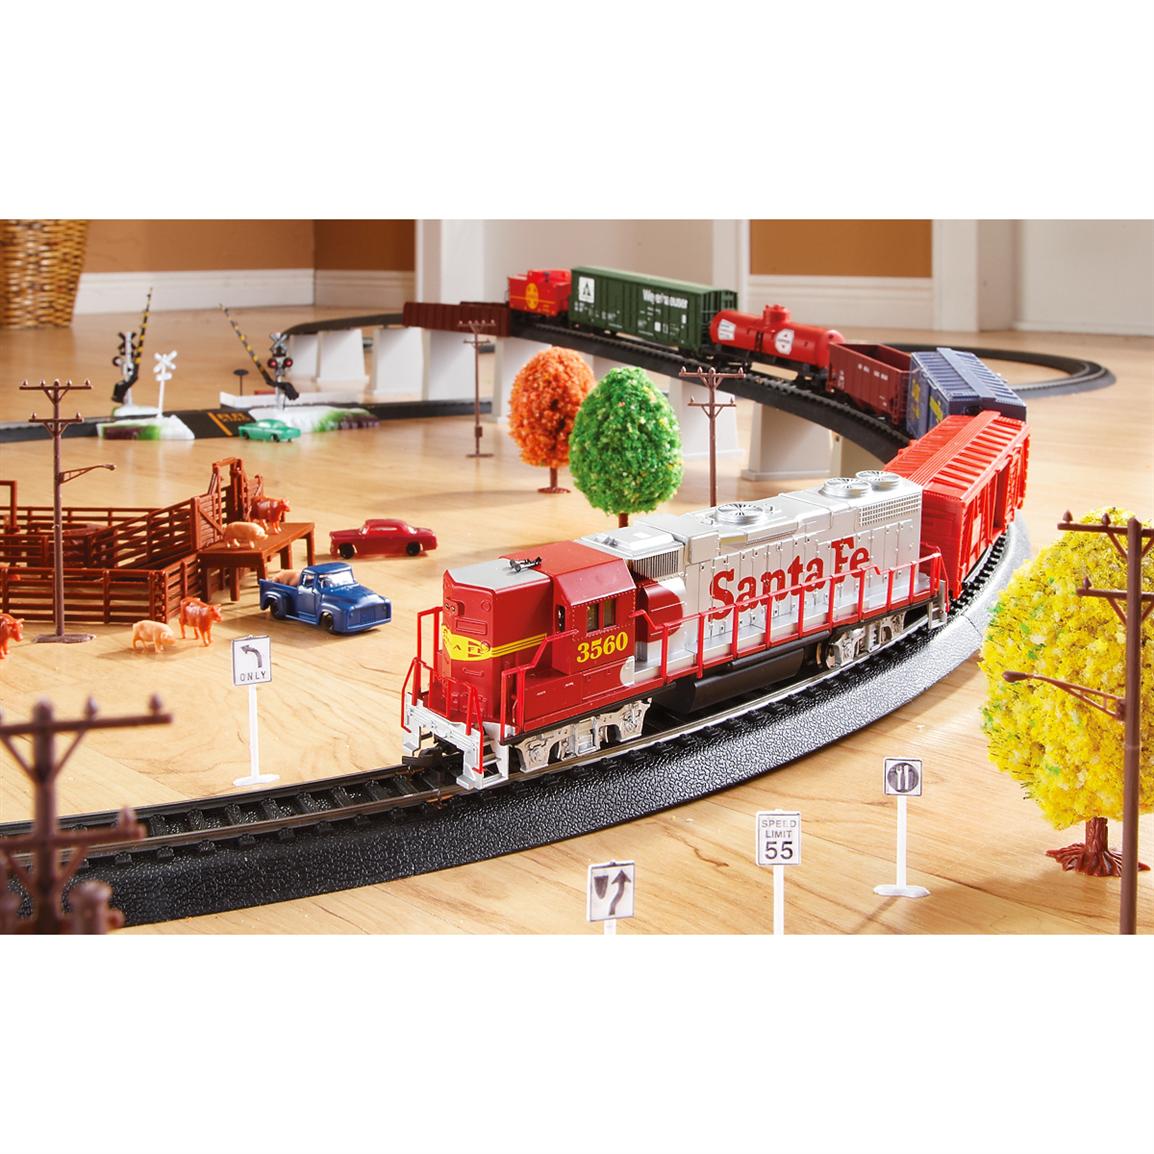  ® Super Power Electric Train Set - 187710, Toys at Sportsman's Guide